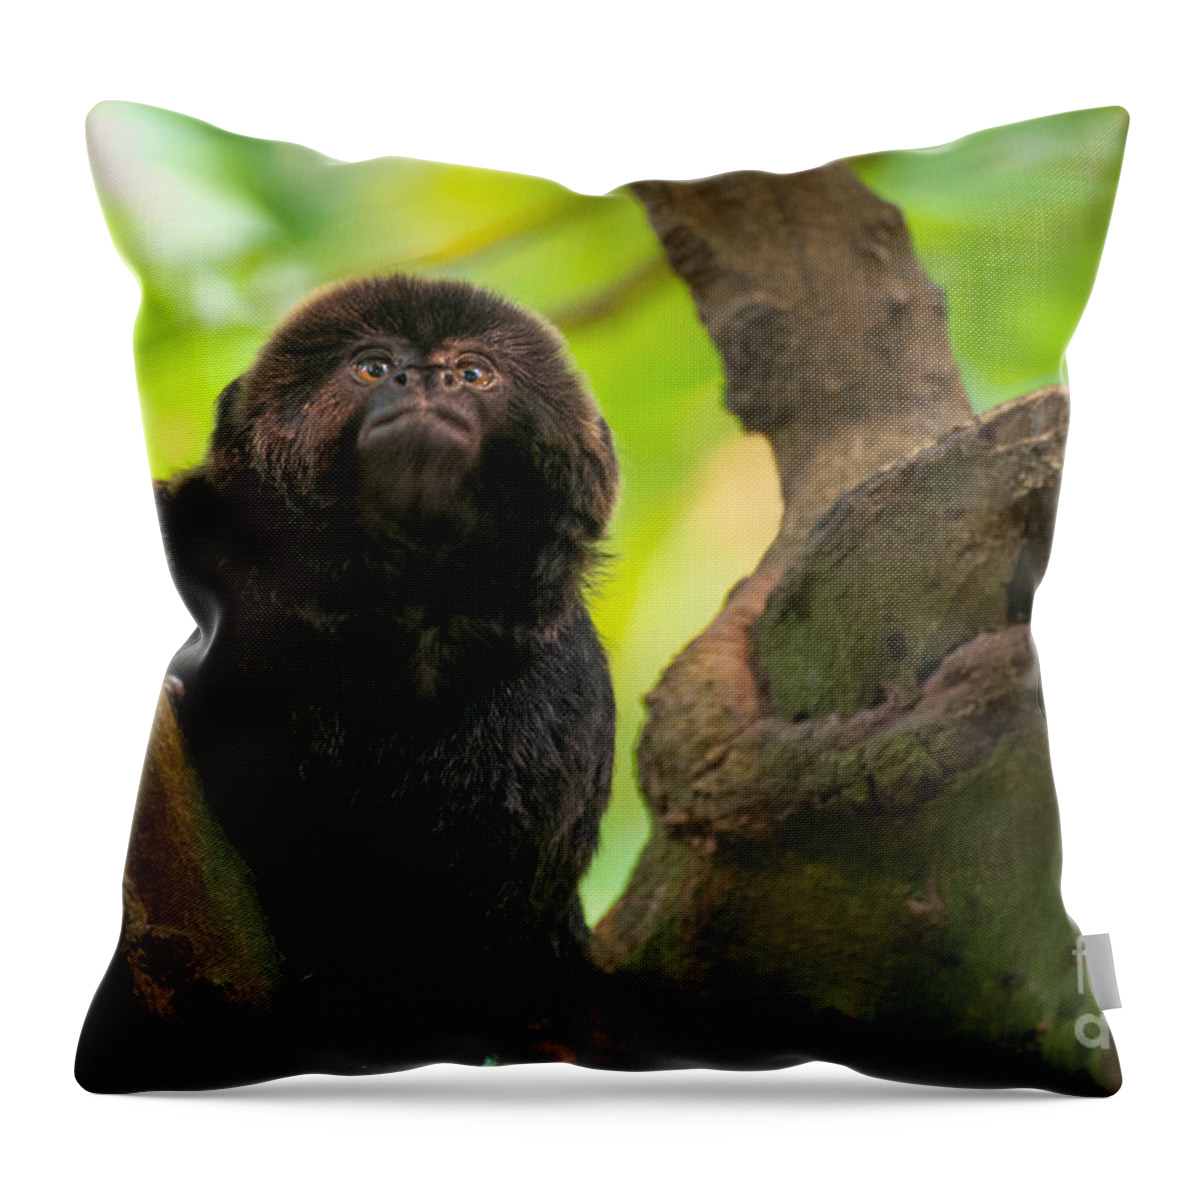 Goeldi's Callimico Throw Pillow featuring the photograph Goeldi's Callimico by Bianca Nadeau